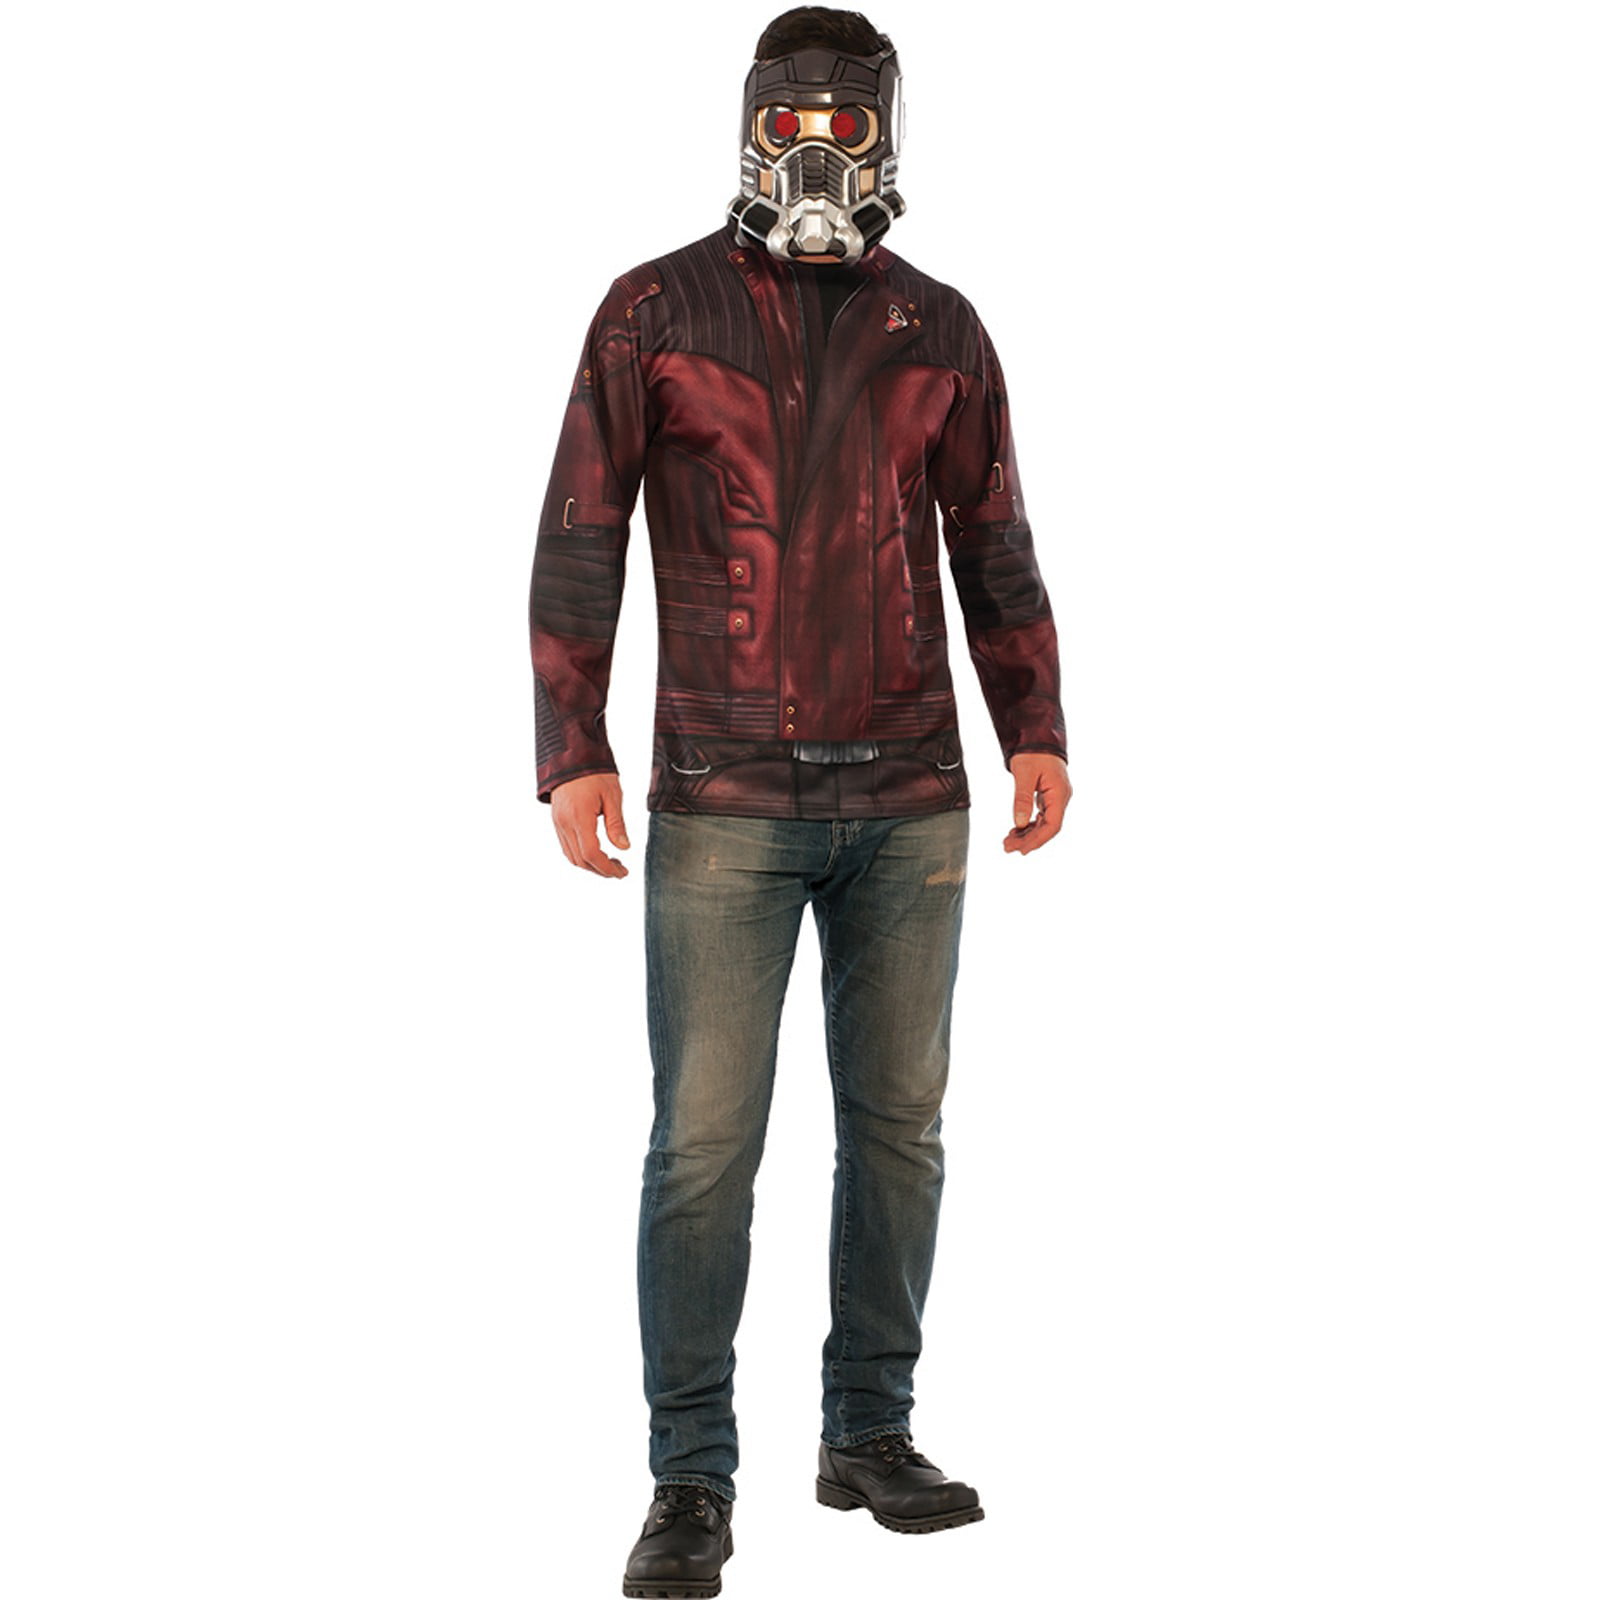 Guardians of the Galaxy Vol.2 Star-Lord Adult Costume 